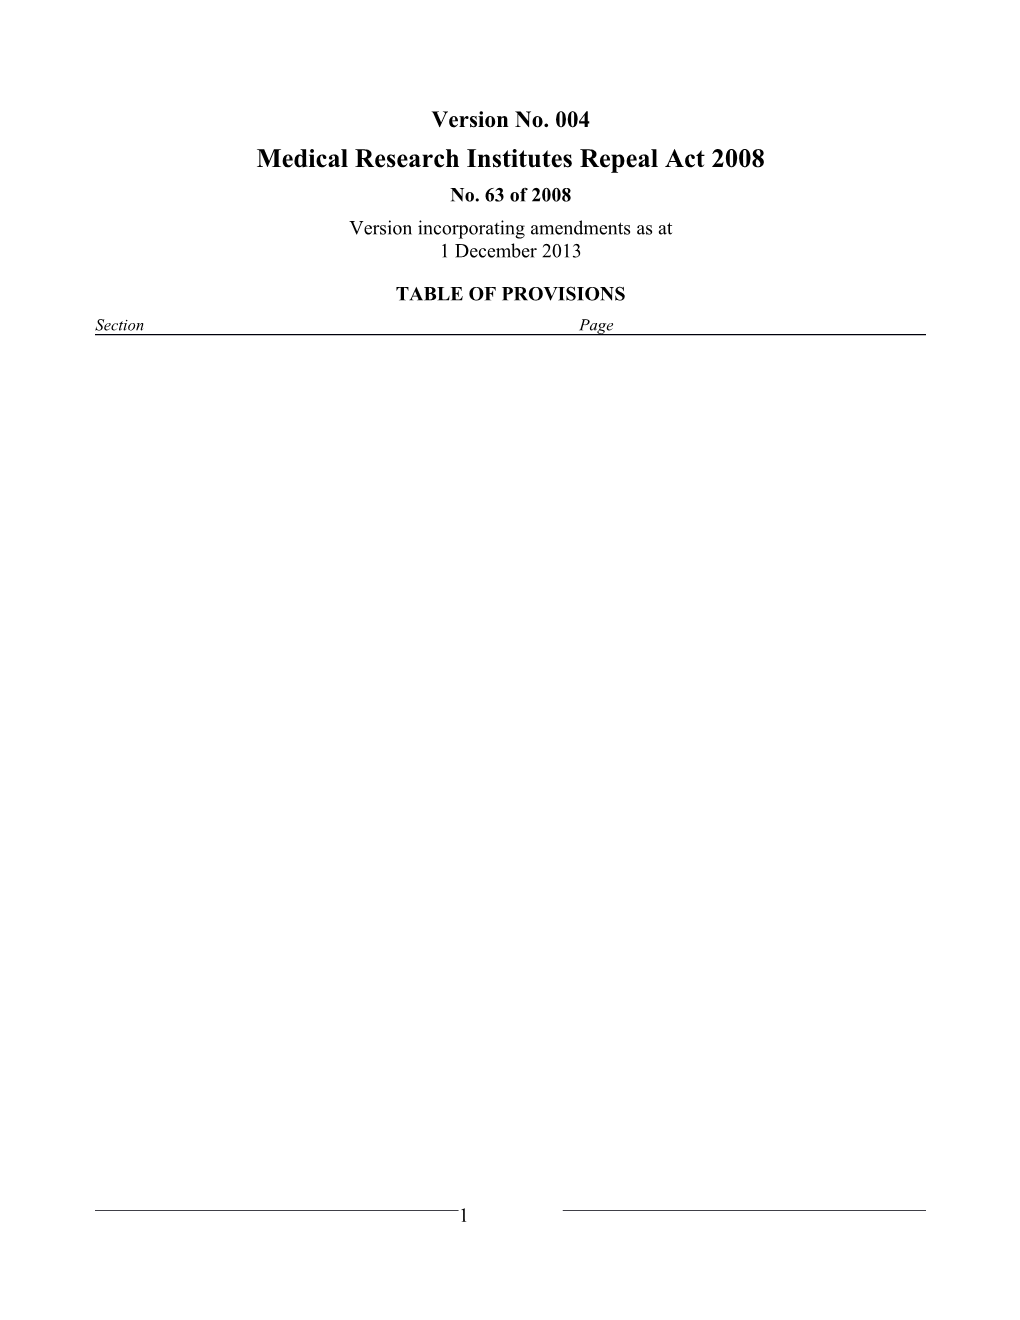 Medical Research Institutes Repeal Act 2008